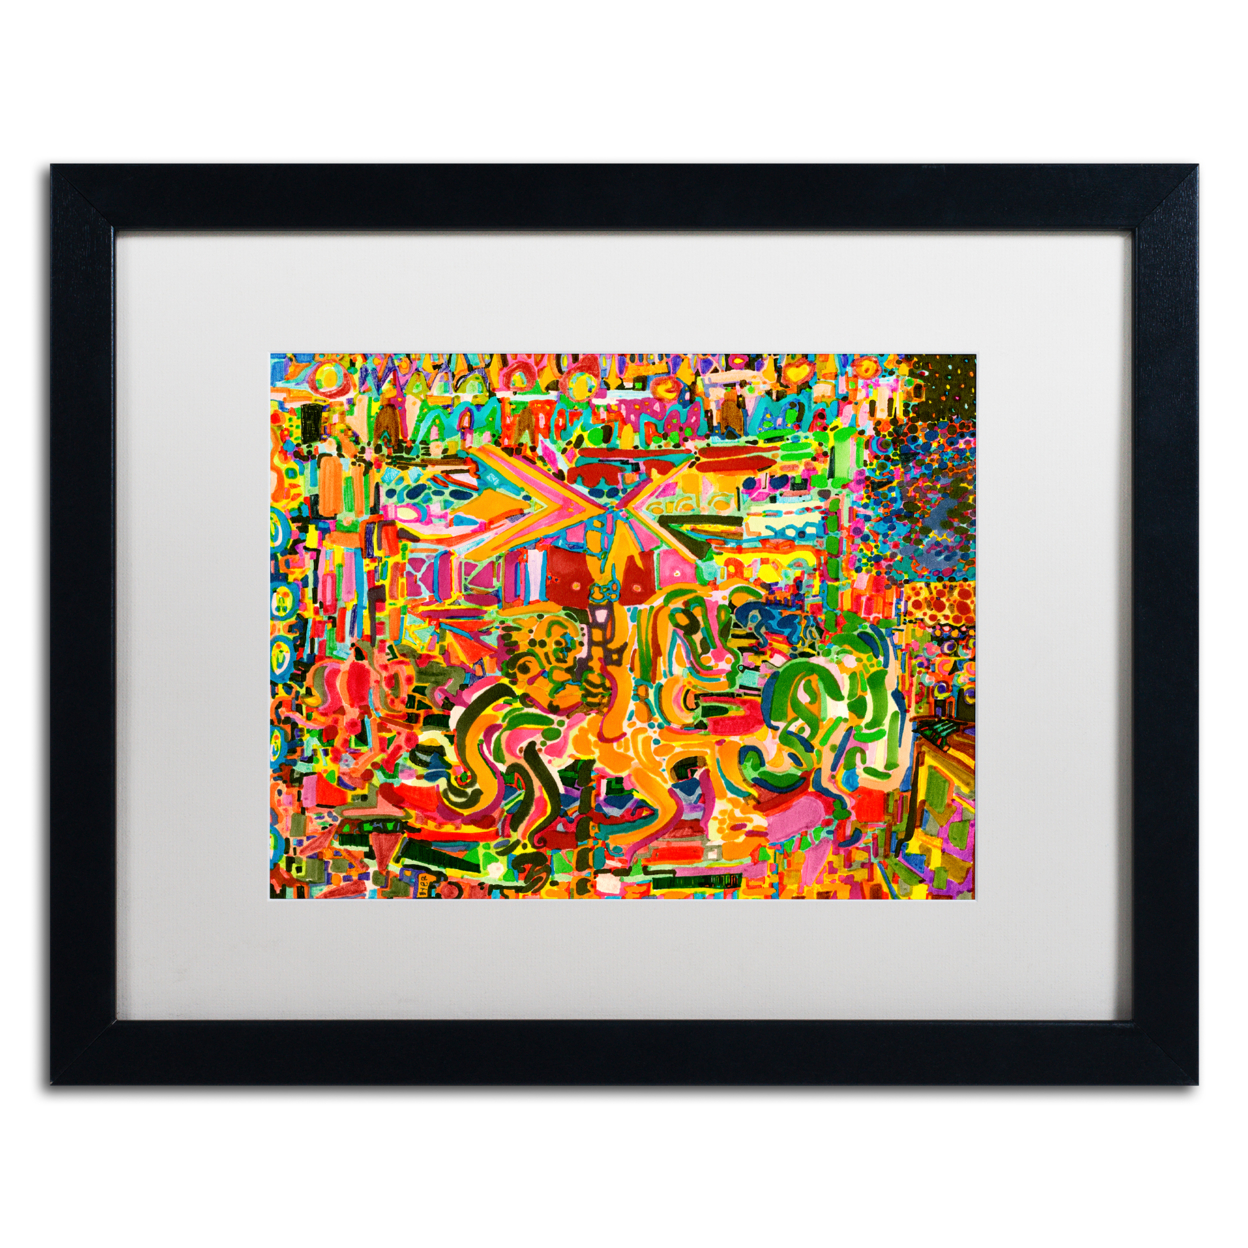 Josh Byer 'Electric Carnival' Black Wooden Framed Art 18 X 22 Inches